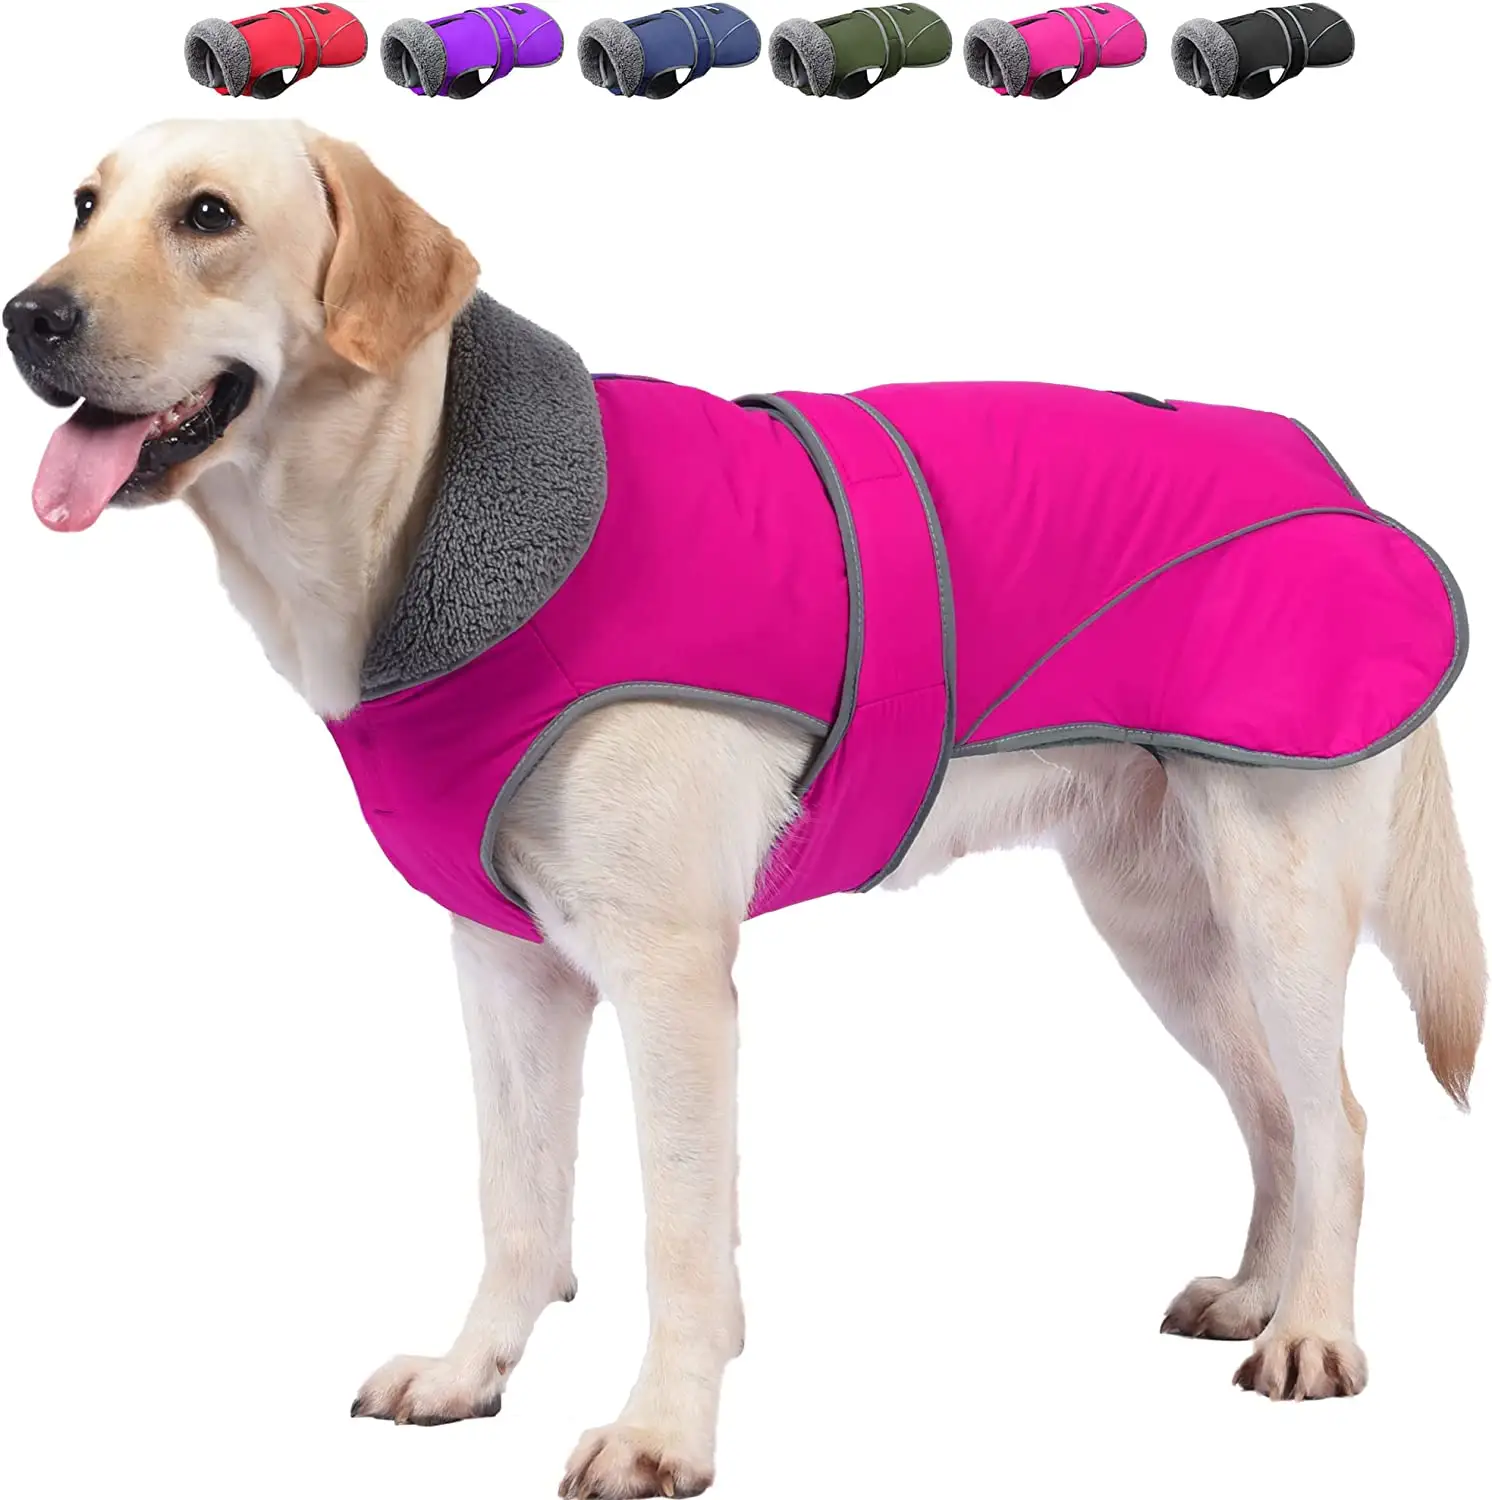 Dog Coat, Christmas Dog Winter Jacket Puppy Cold Weather Coats with Thick Padded, Reflective Dog Sweater Waterproof Windproof